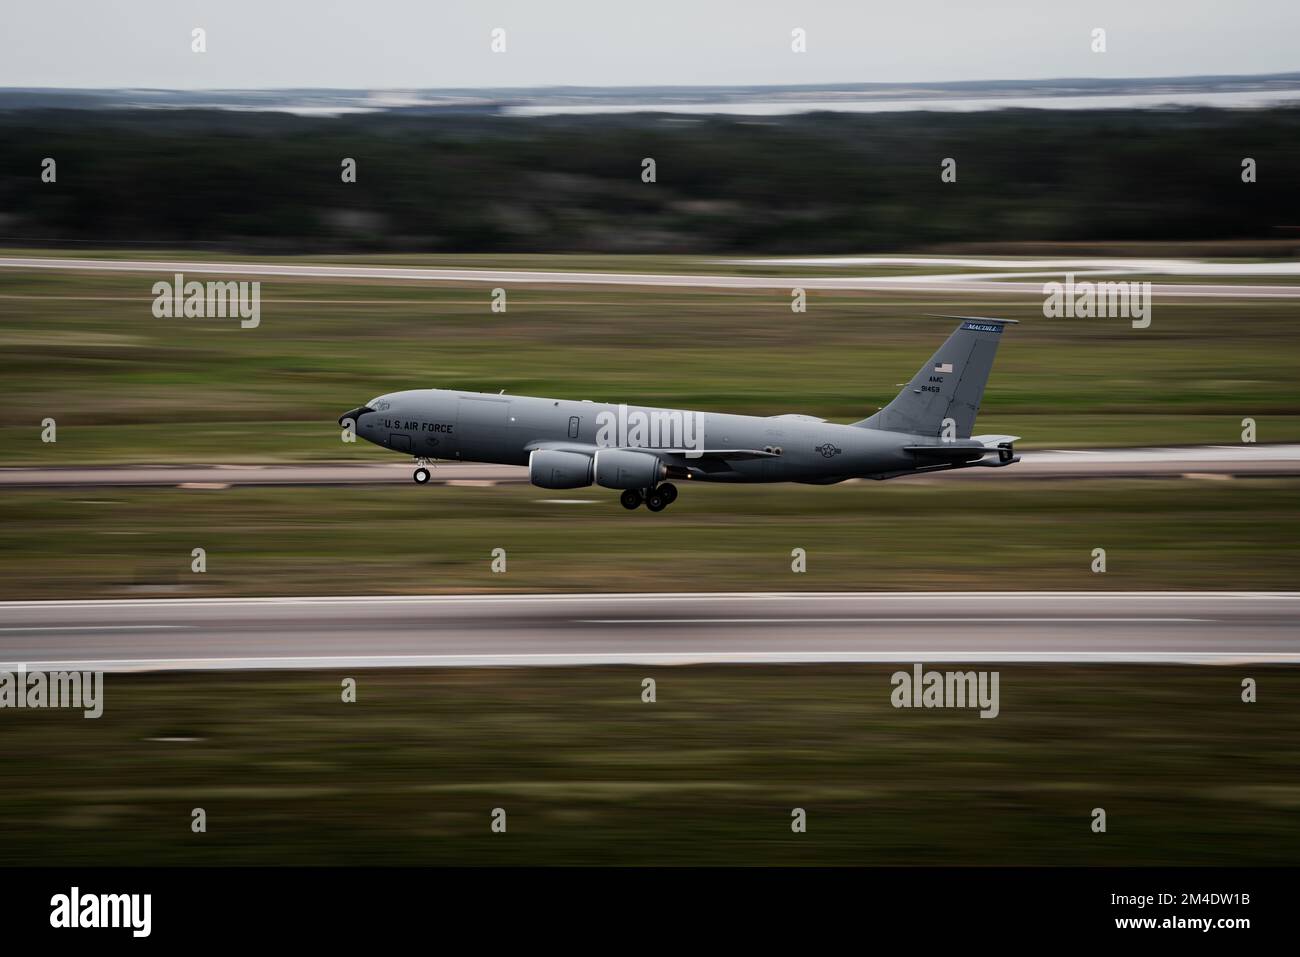 A KC-135 Stratotanker aircraft assigned to the 6th Air Refueling Wing ascends off the runway during a touch-and-go circuit at MacDill Air Force Base, Florida, Dec. 16, 2022. Touch-and-go circuits involve aircraft landing on a runway and taking off again without fully stopping. These exercises provide Air Force pilots opportunities to fine-tune their landing and aviation skills. (U.S. Air Force photo by Senior Airman Joshua Hastings) Stock Photo